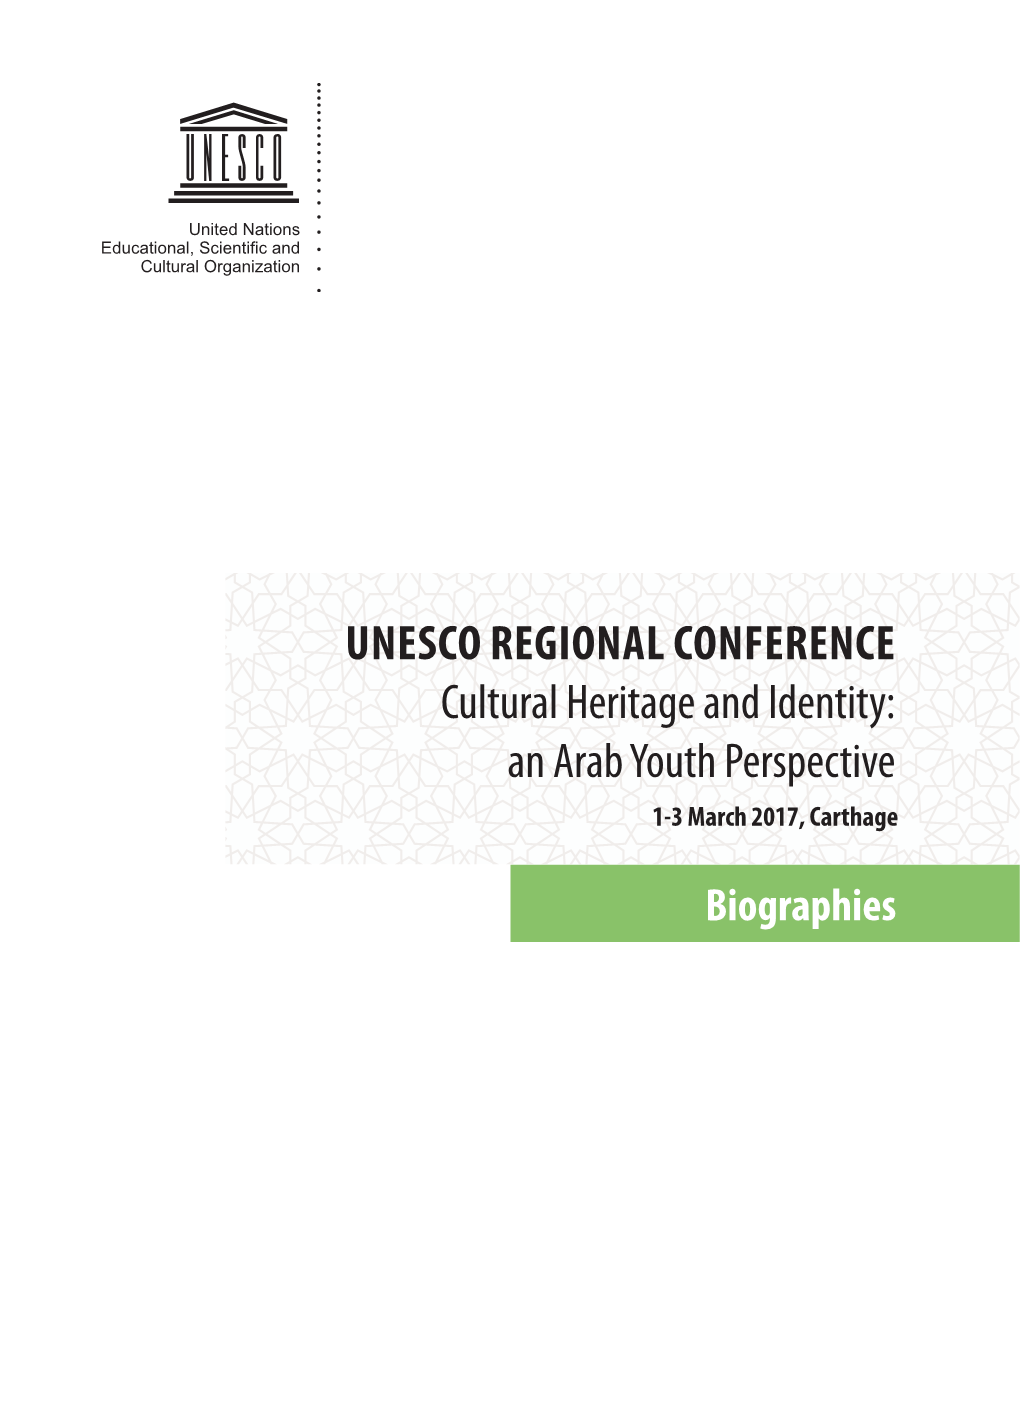 UNESCO REGIONAL CONFERENCE Cultural Heritage and Identity: an Arab Youth Perspective 1-3 March 2017, Carthage